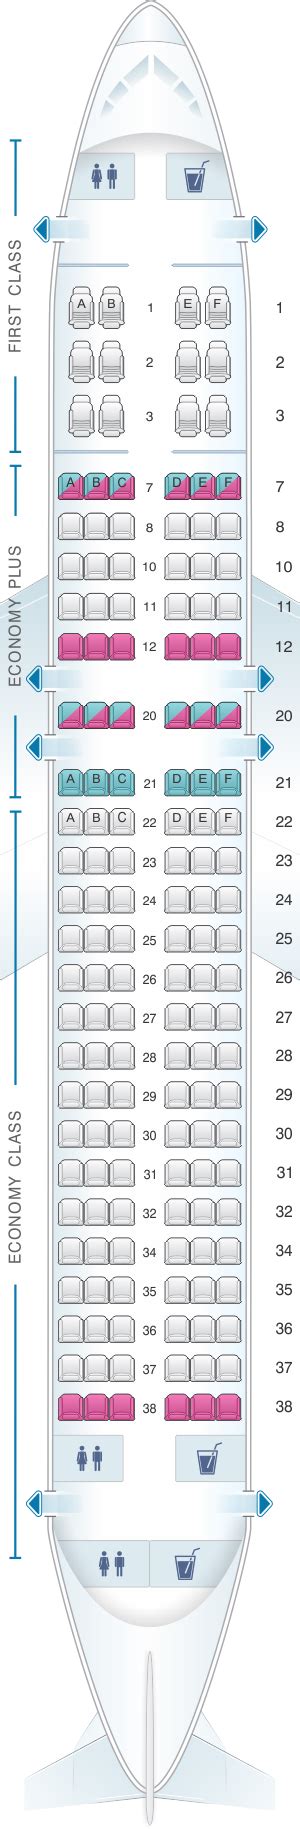 Airbus A320 United Airlines Seating Chart Seat Map United Airlines